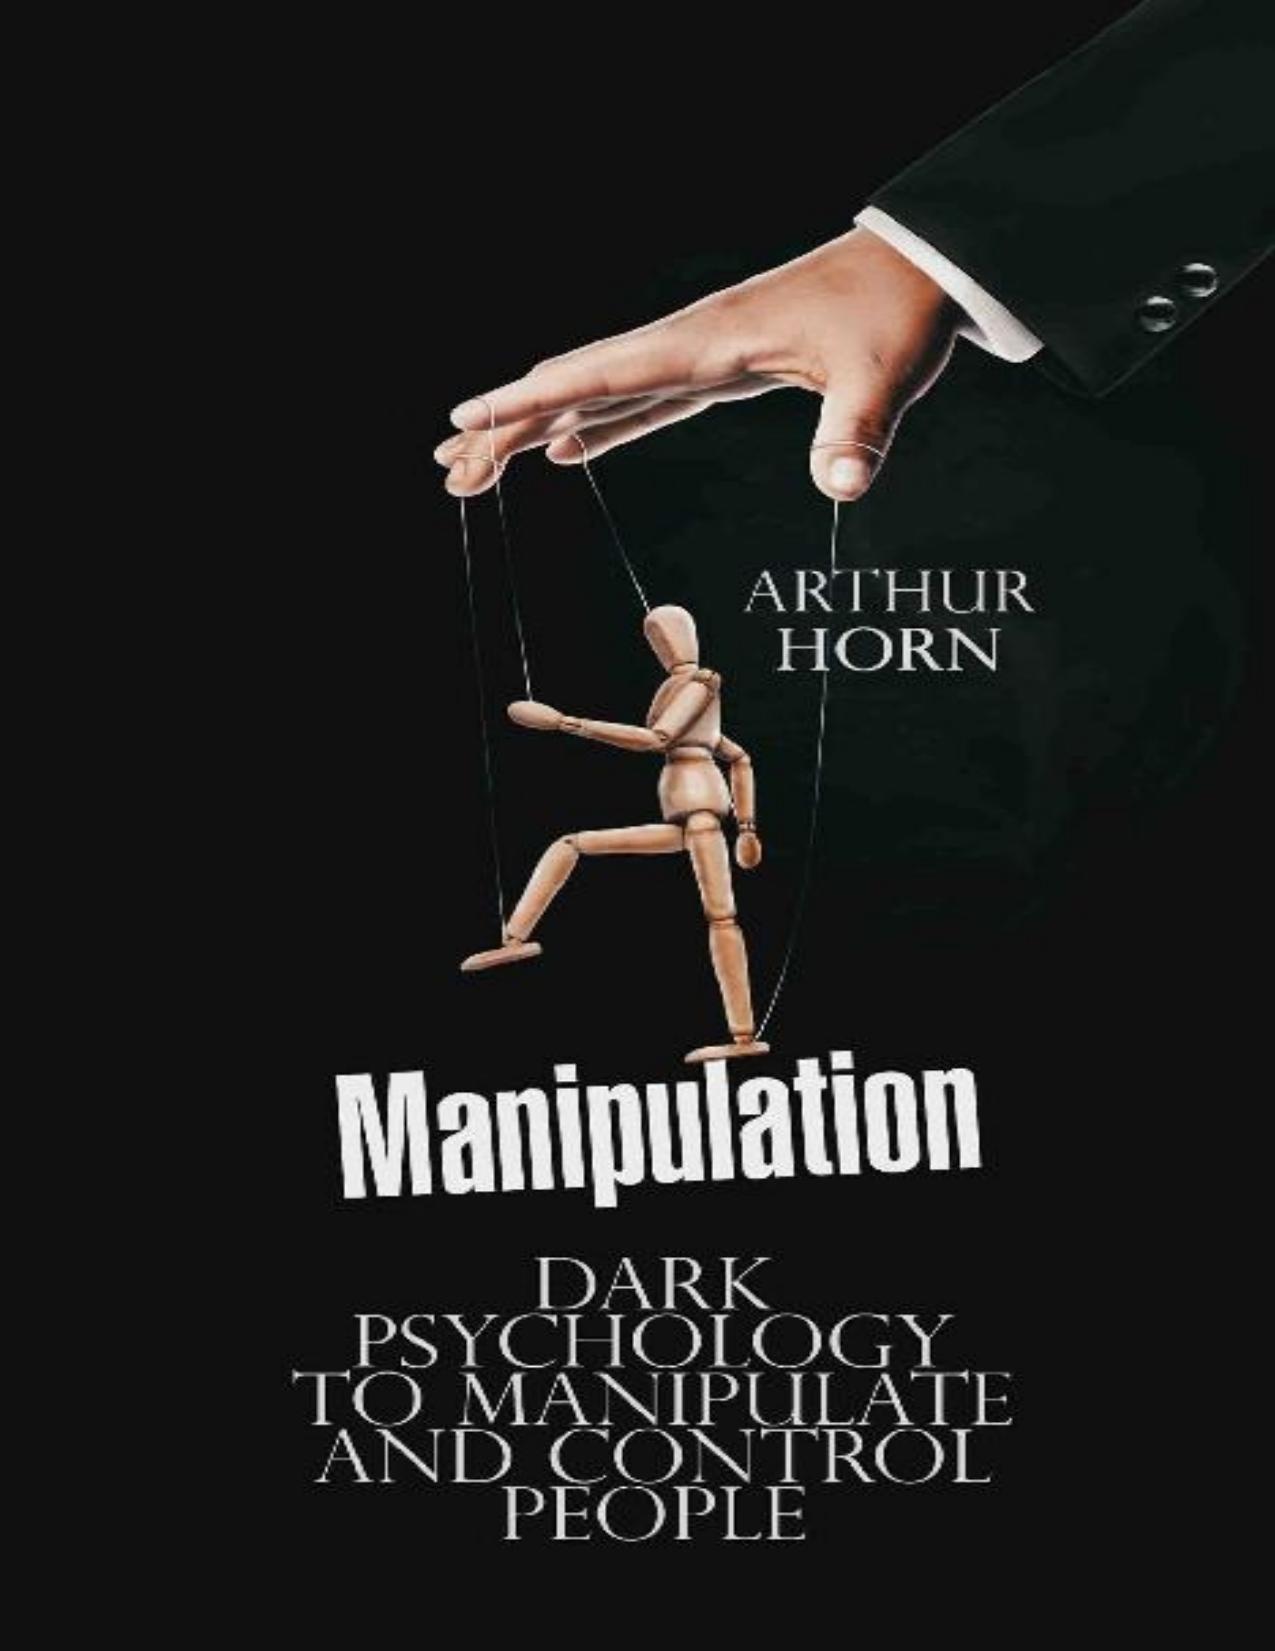 Manipulation Dark Psychology to Manipulate and Control People - PDFDrive.com